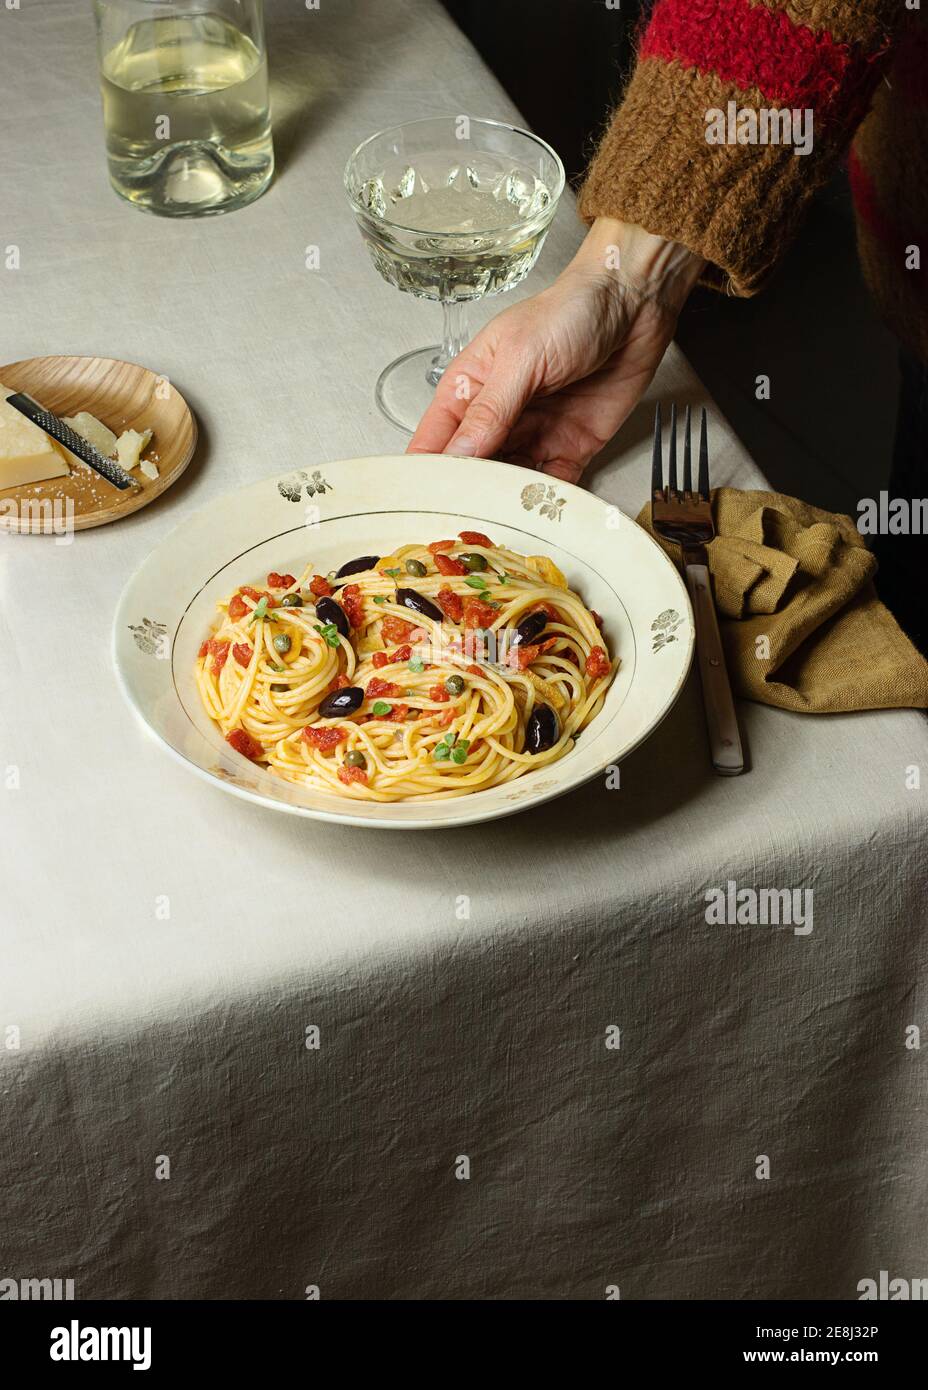 Cropped unrecognizable person eating Spaghetti alla Puttanesca server with glass oh white wine placed on table with napkin Stock Photo